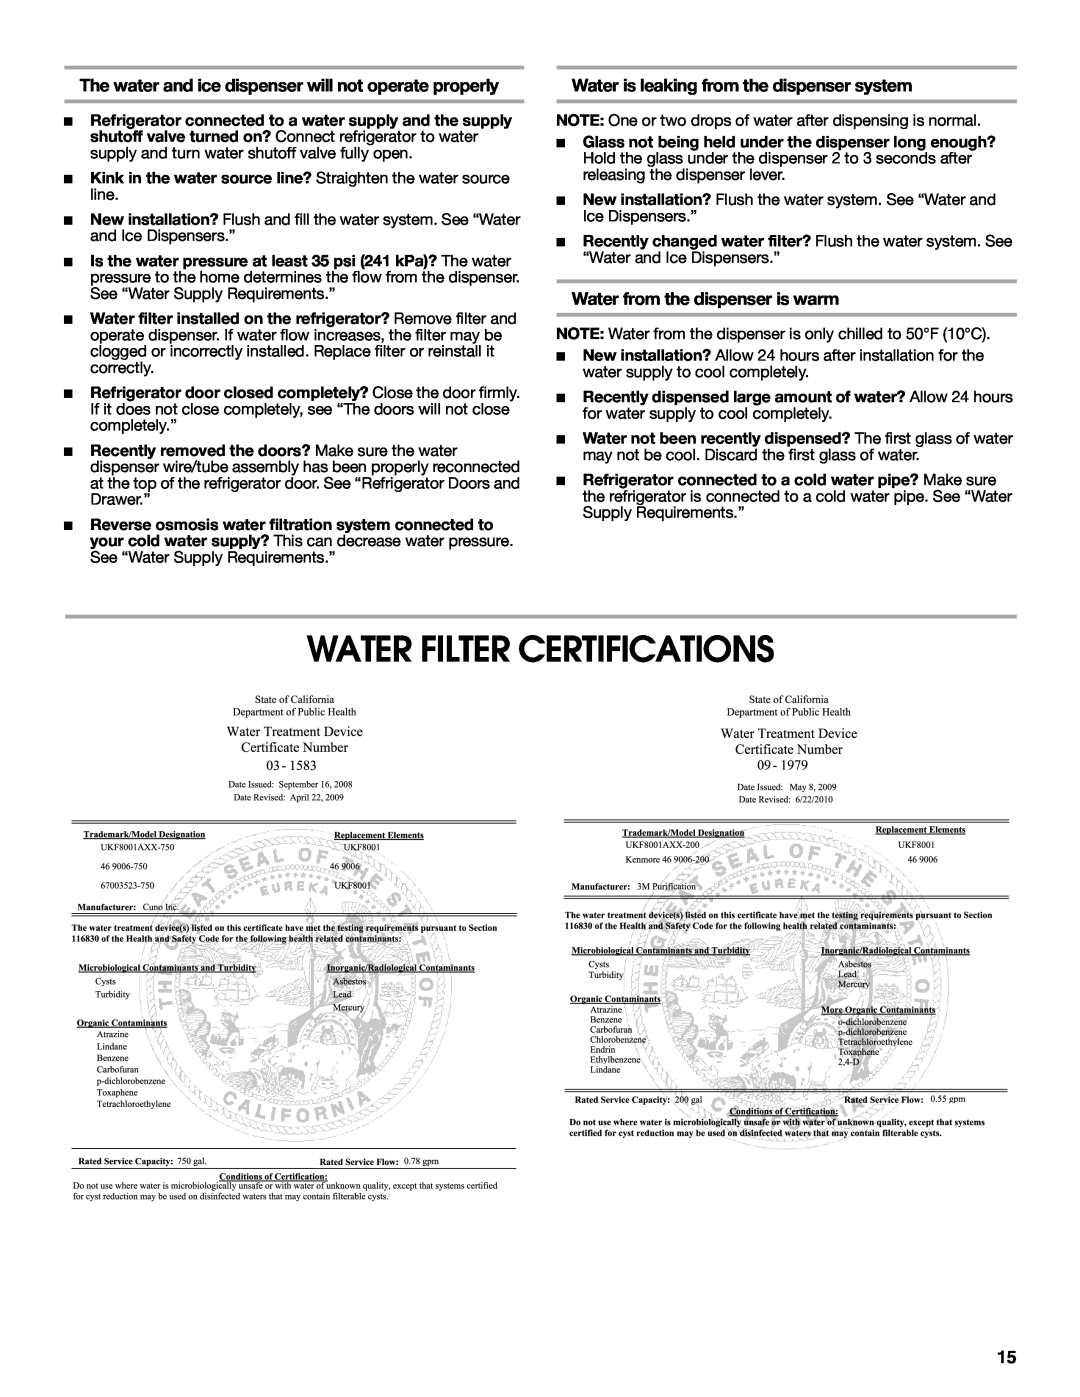 Jenn-Air W10329370A installation instructions Water Filter Certifications, Water is leaking from the dispenser system 